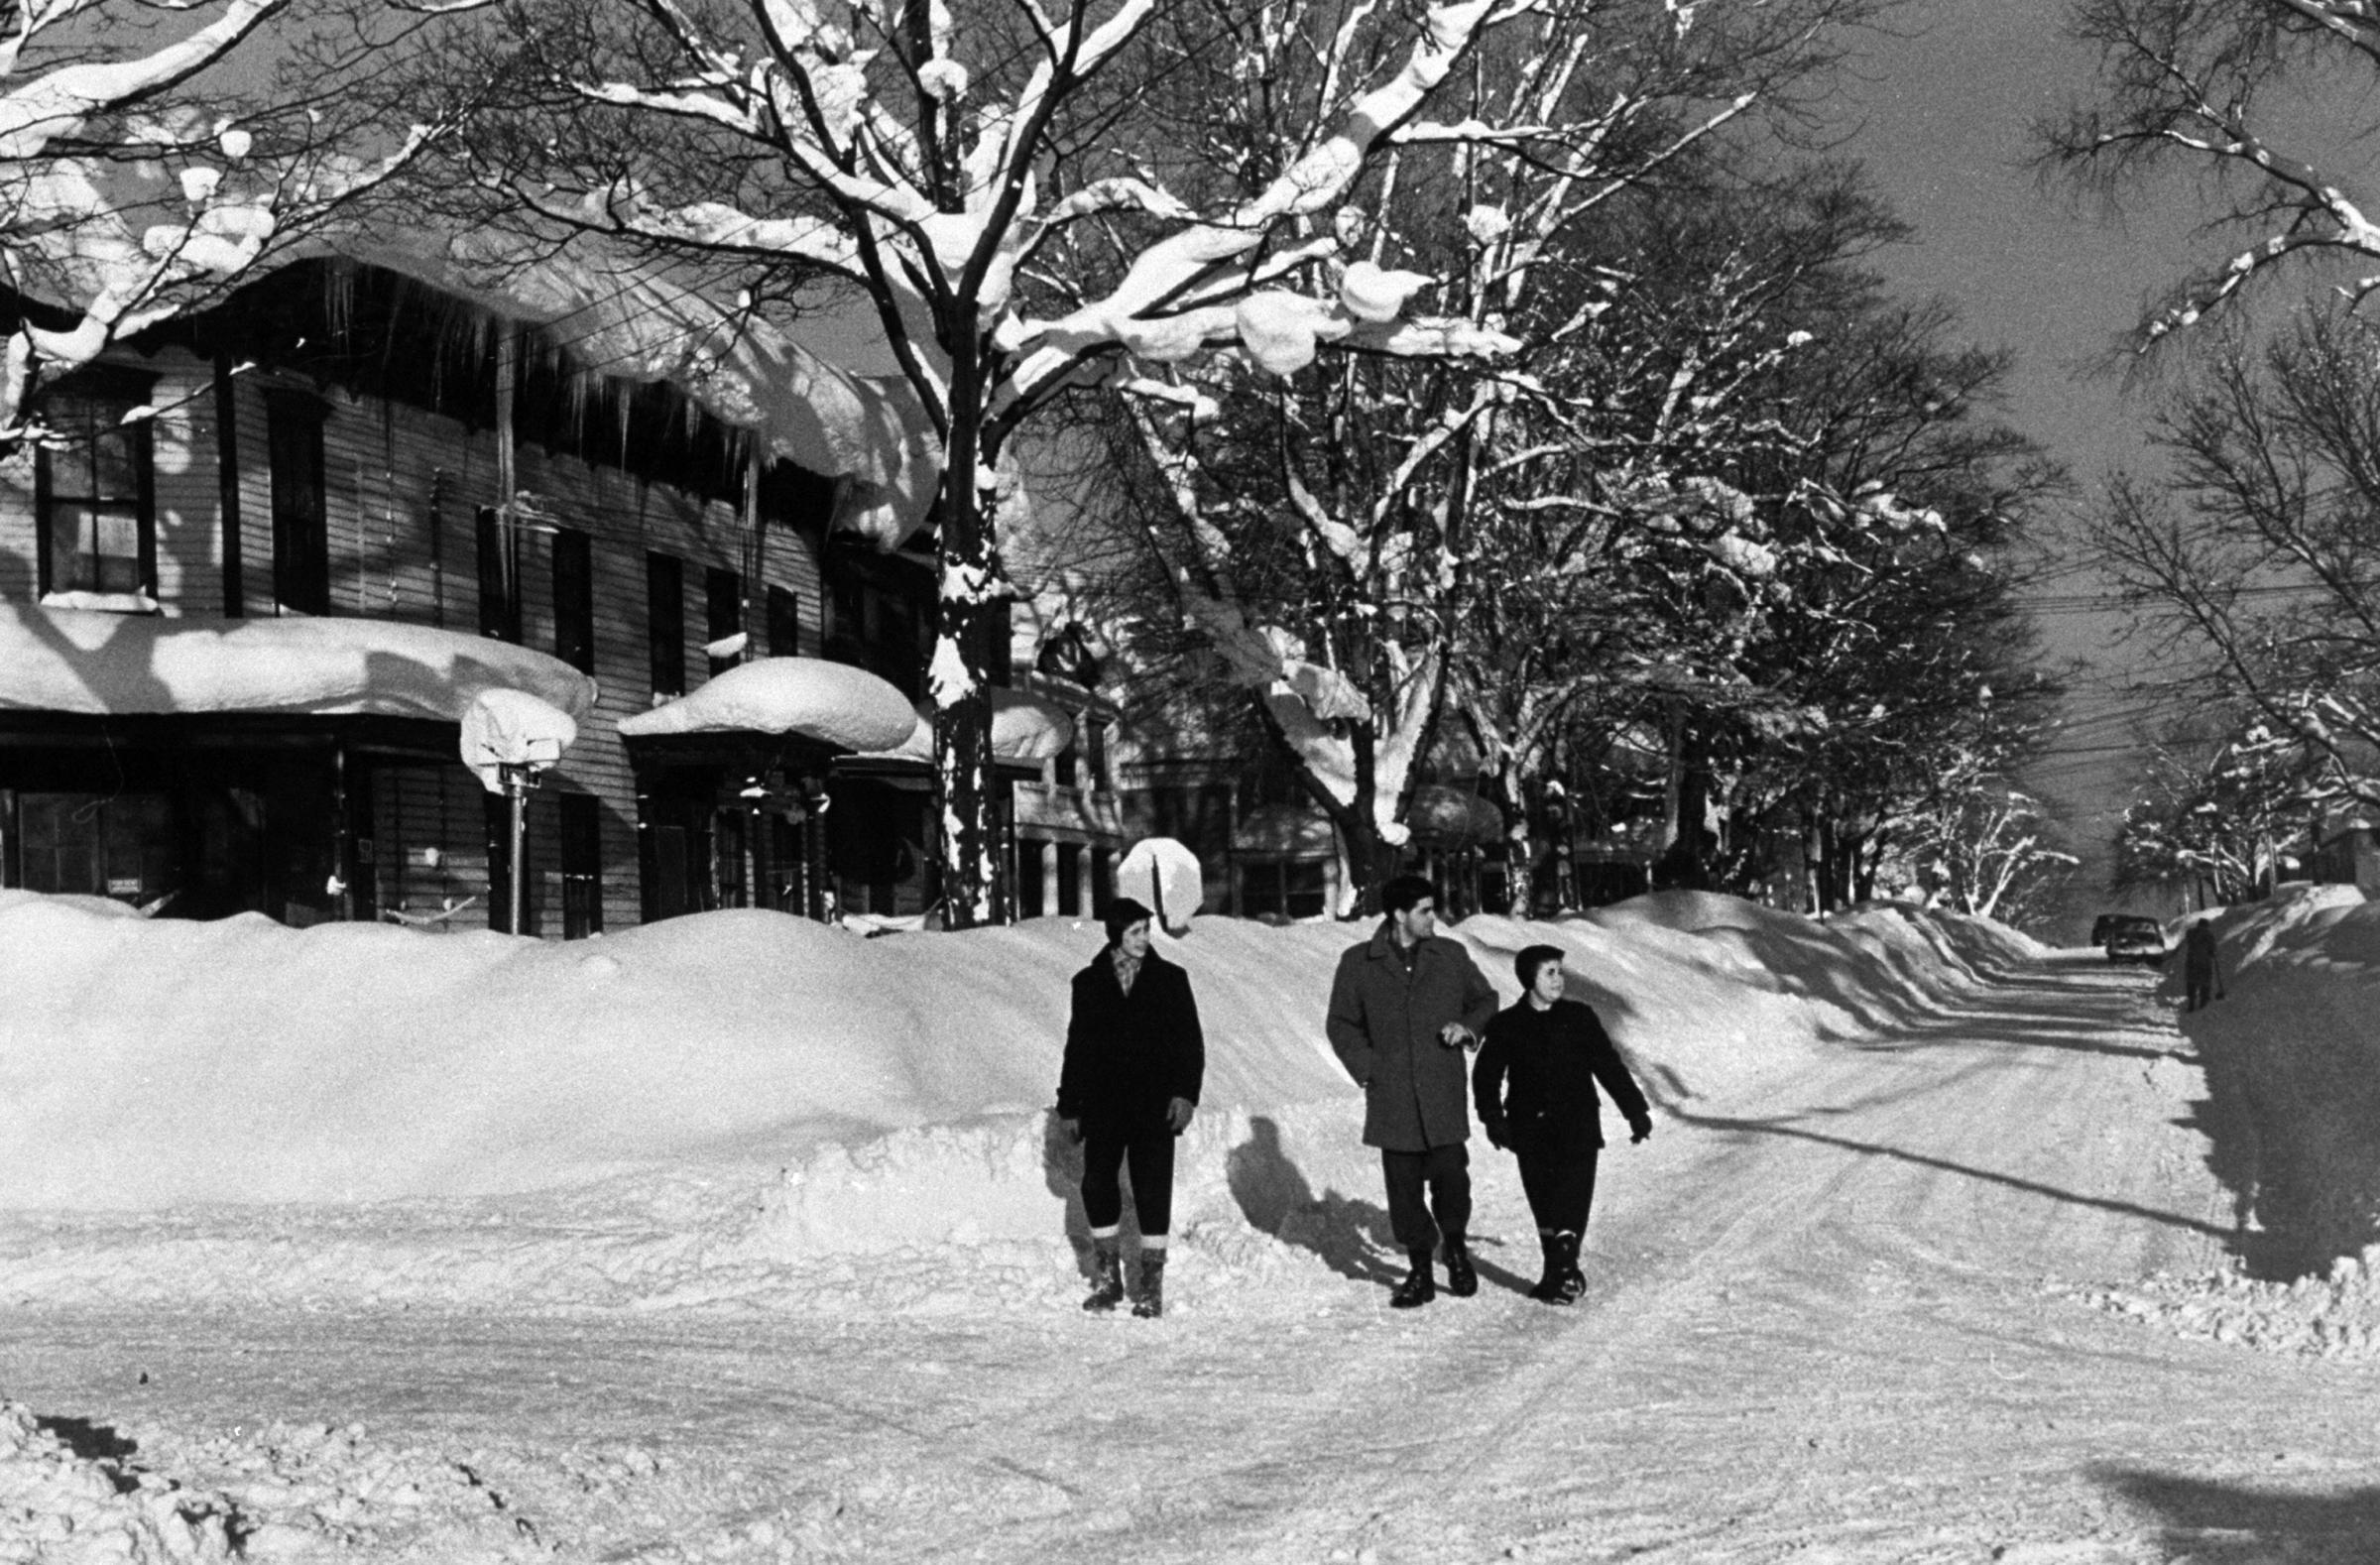 Scene from a snow storm in Oswego, New York, on December 1958 that dropped over 6 feet of snow.